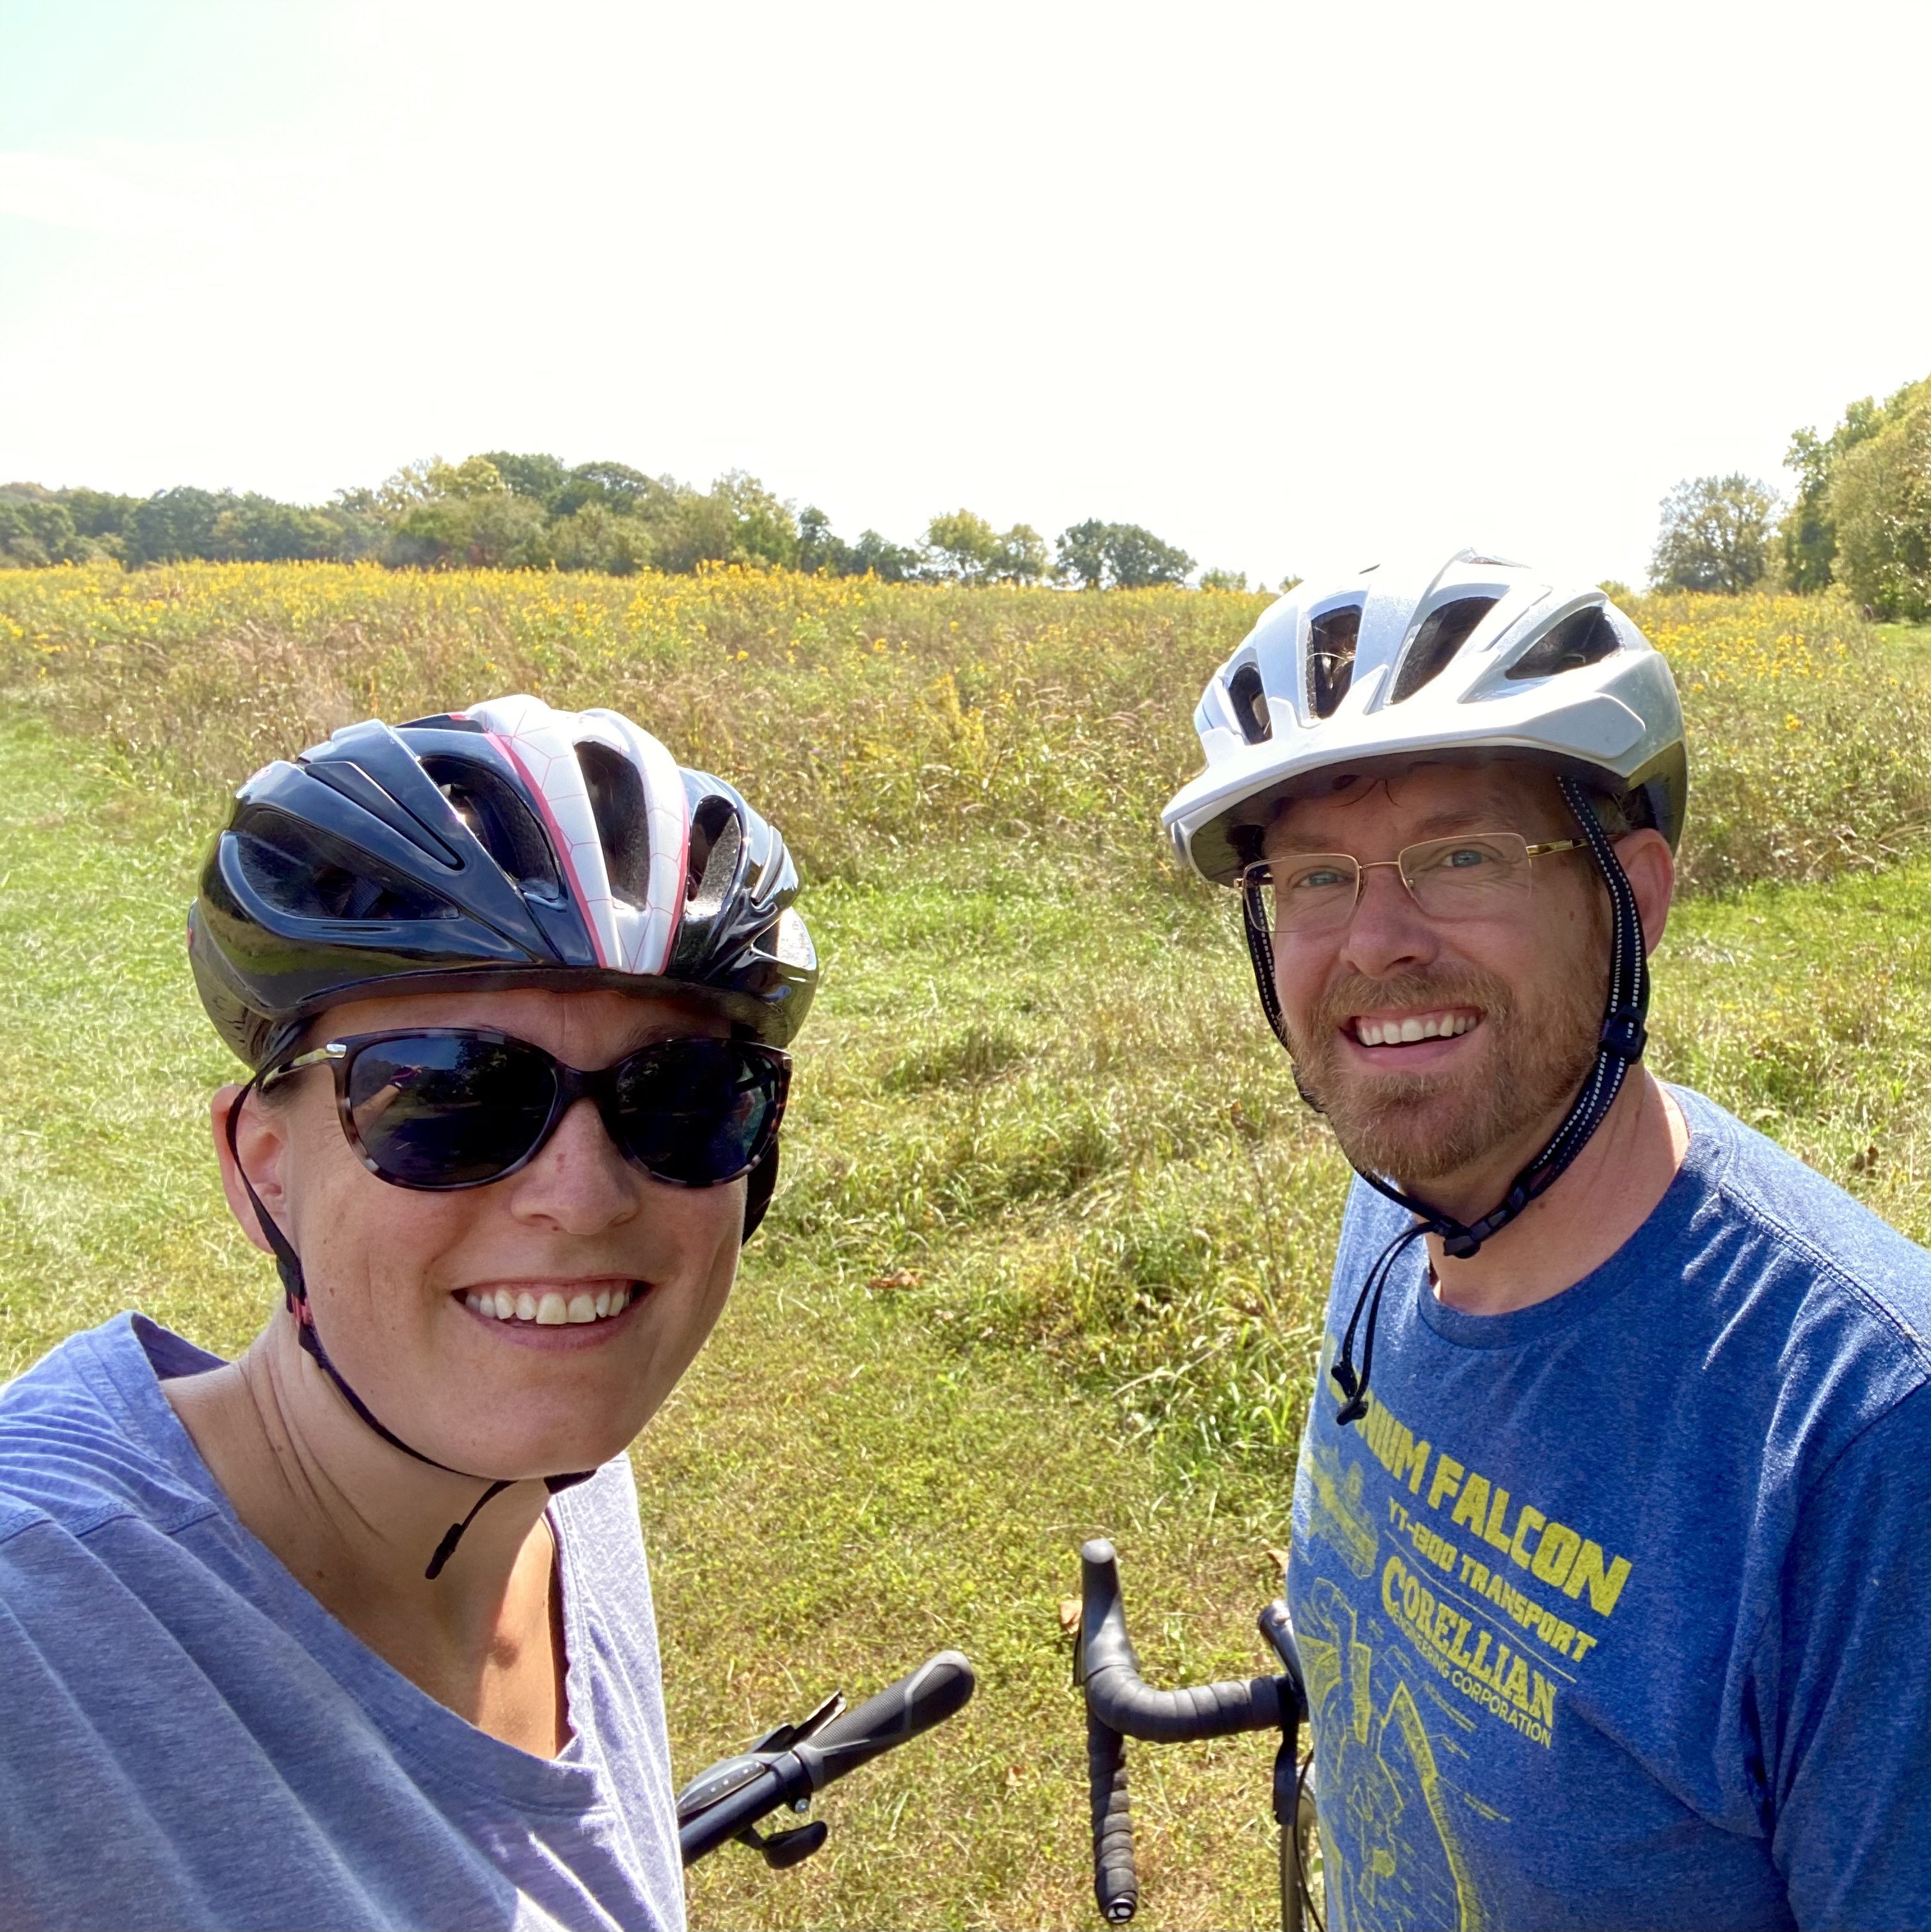 Courtney Tripp is pictured wearing a bike helmet and sunglasses. She is smiling and standing next to her husband Asa who is also wearing his bike helmet while biking on a Kansas trail.